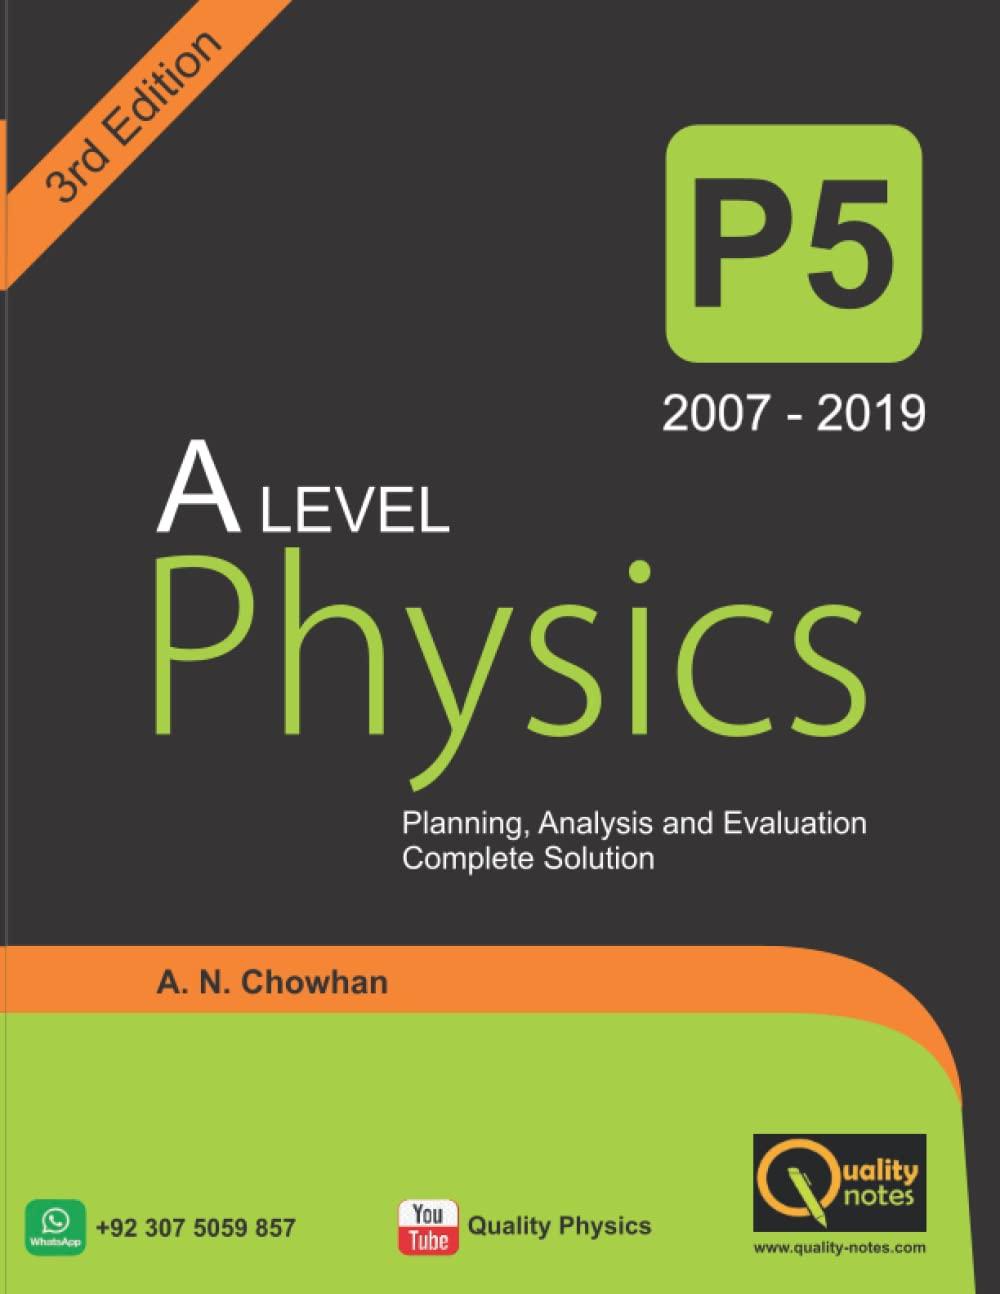 a level physics planning analysis and evaluation complete solution paper 5 3rd edition a n chowhan